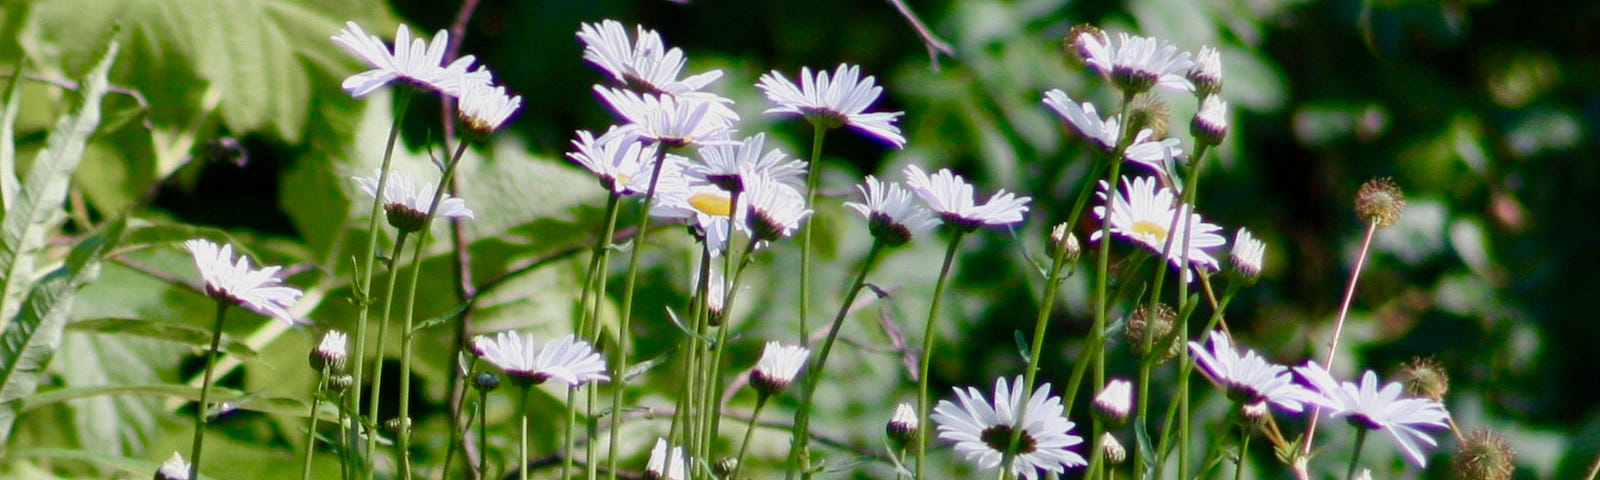 Daisies rise towards the sun in a field of green foliage